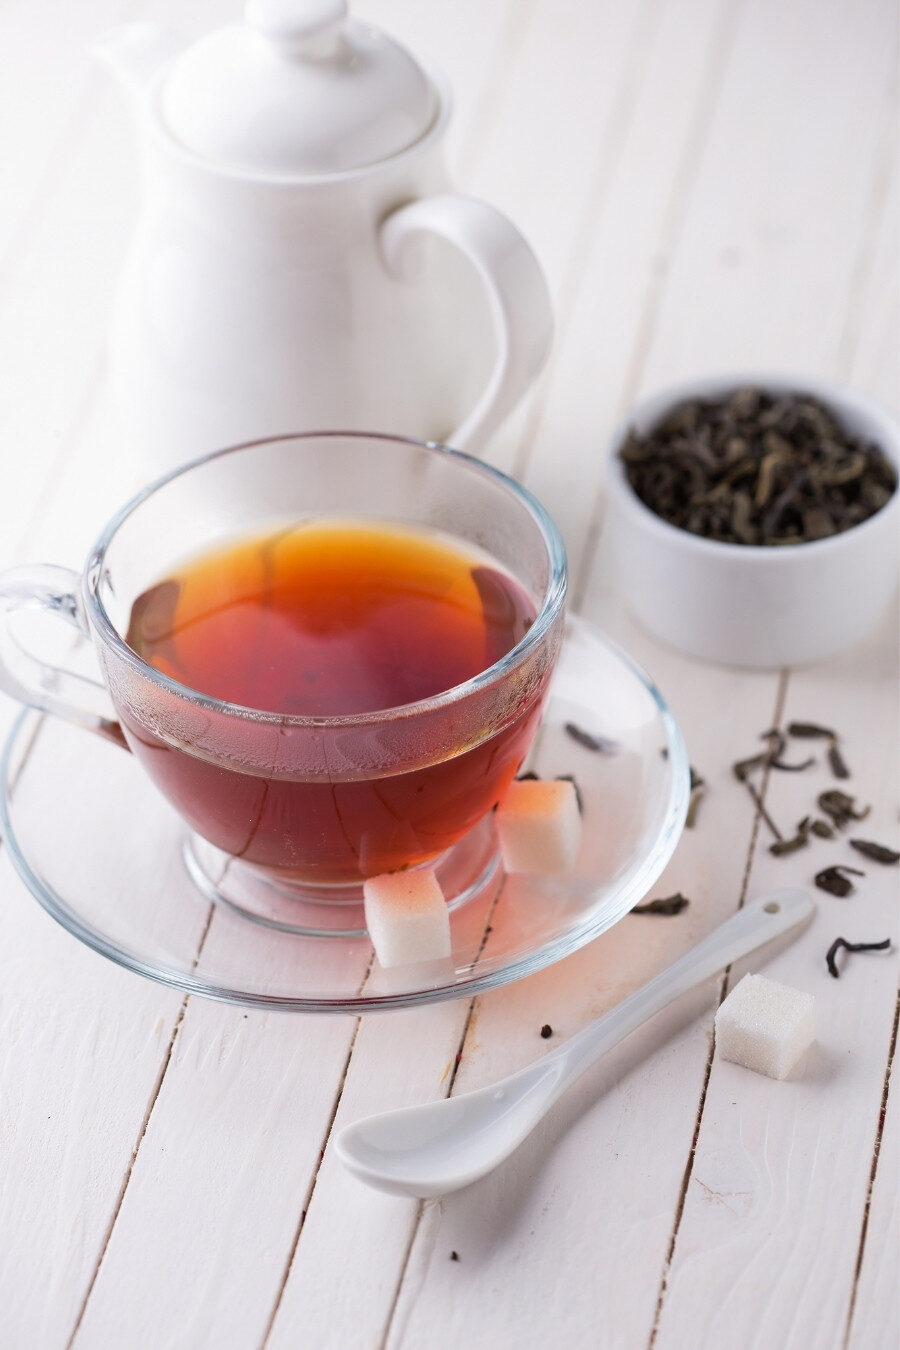 Which Types Of Tea Can Support Weight Loss?